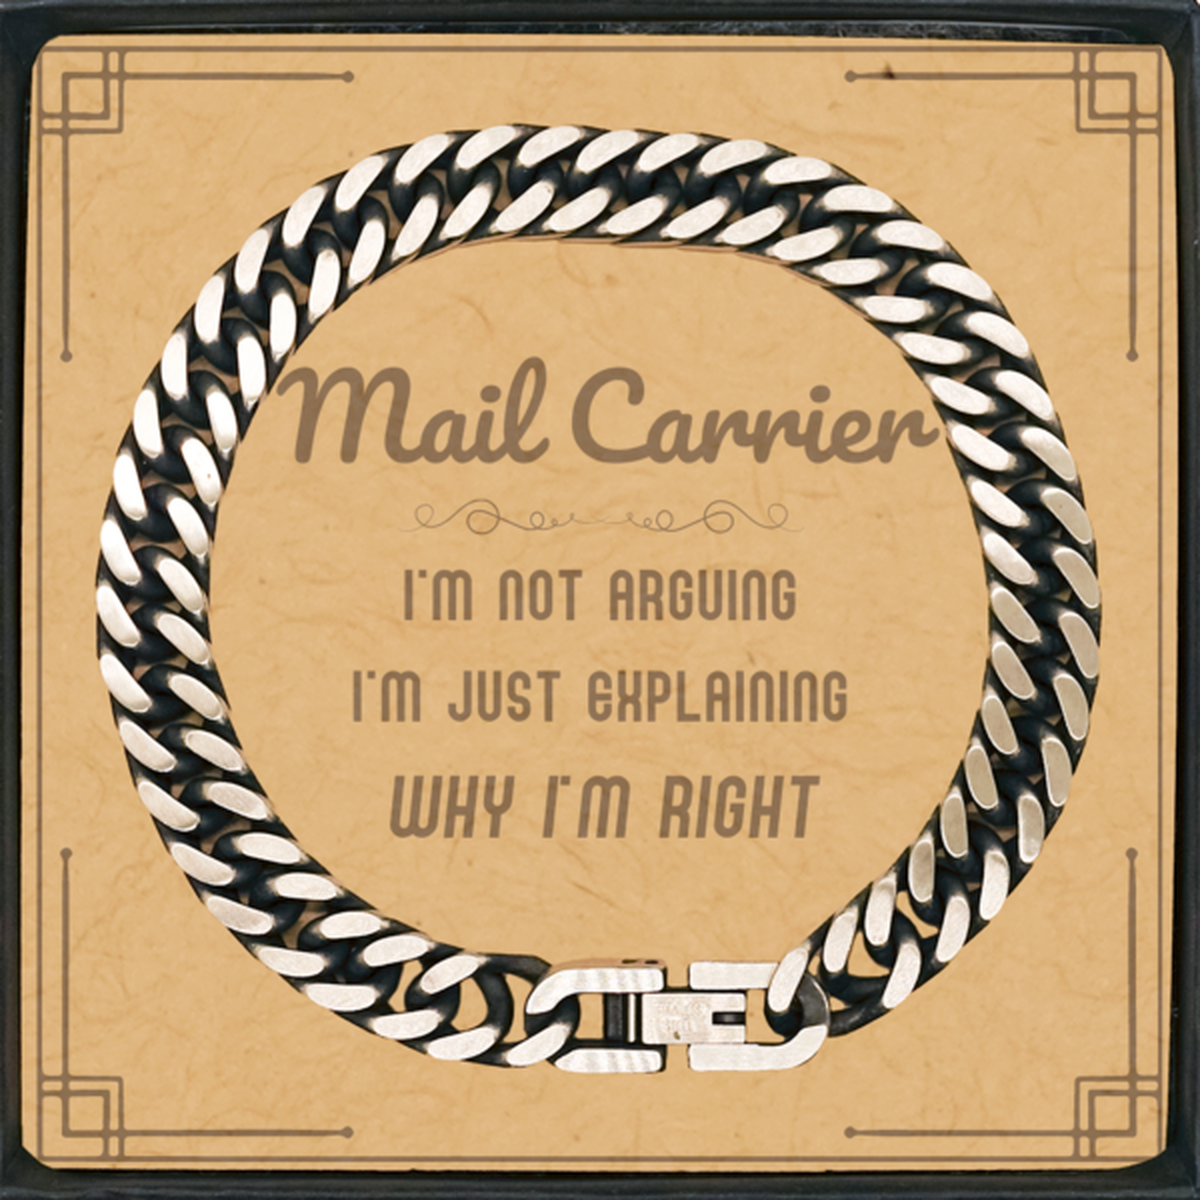 Mail Carrier I'm not Arguing. I'm Just Explaining Why I'm RIGHT Cuban Link Chain Bracelet, Funny Saying Quote Mail Carrier Gifts For Mail Carrier Message Card Graduation Birthday Christmas Gifts for Men Women Coworker